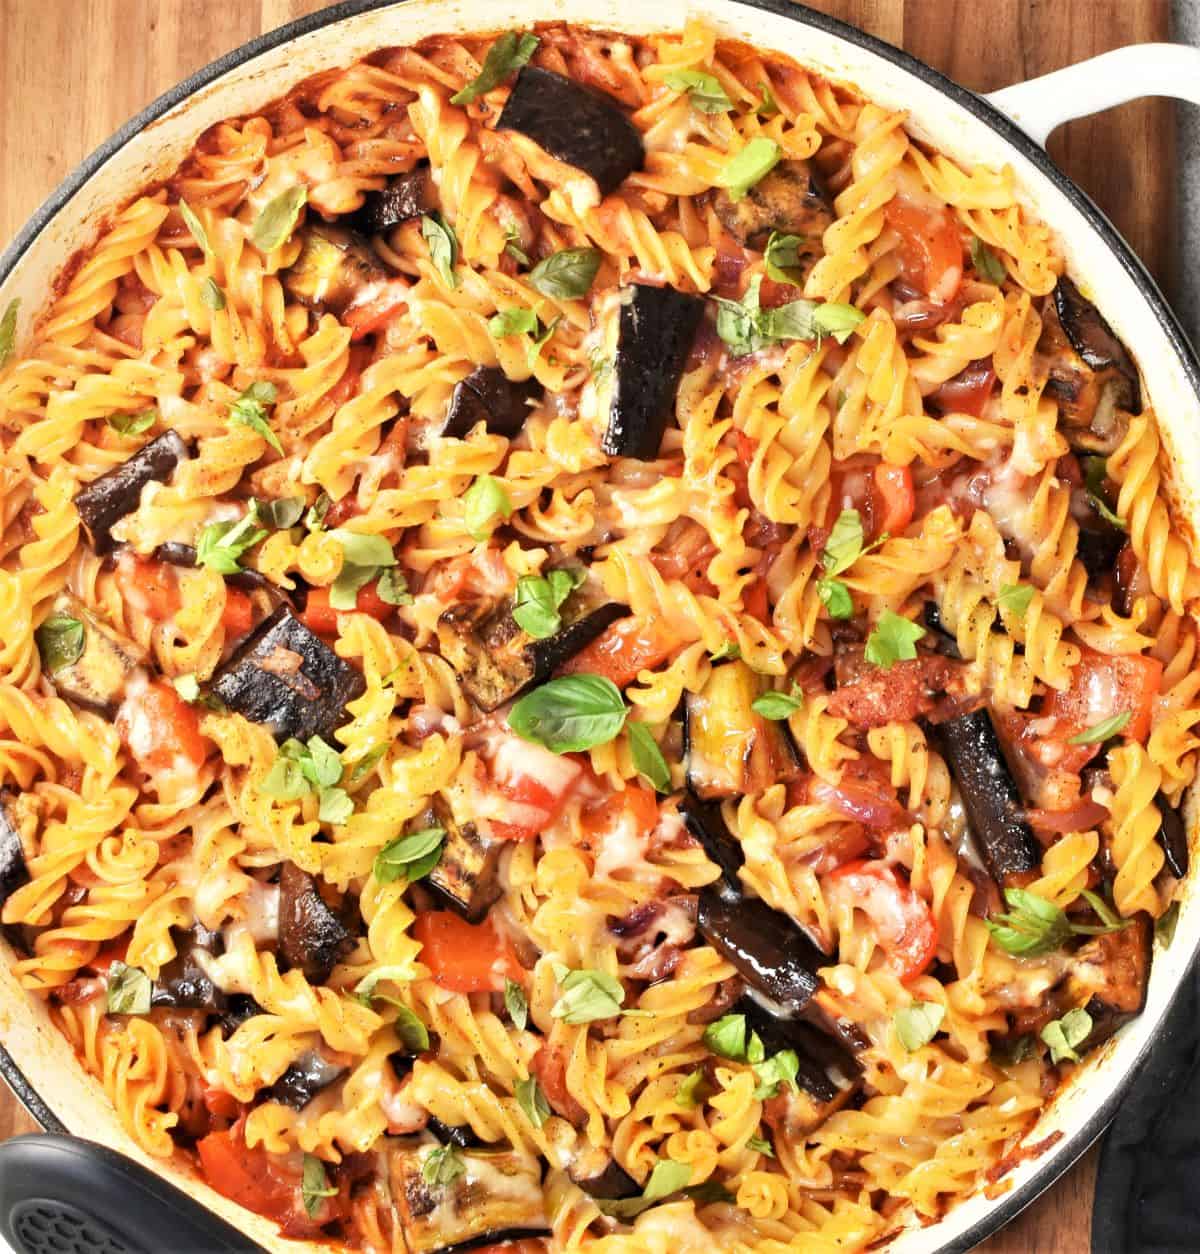 Pasta bake with eggplant in shallow round casserole dish.